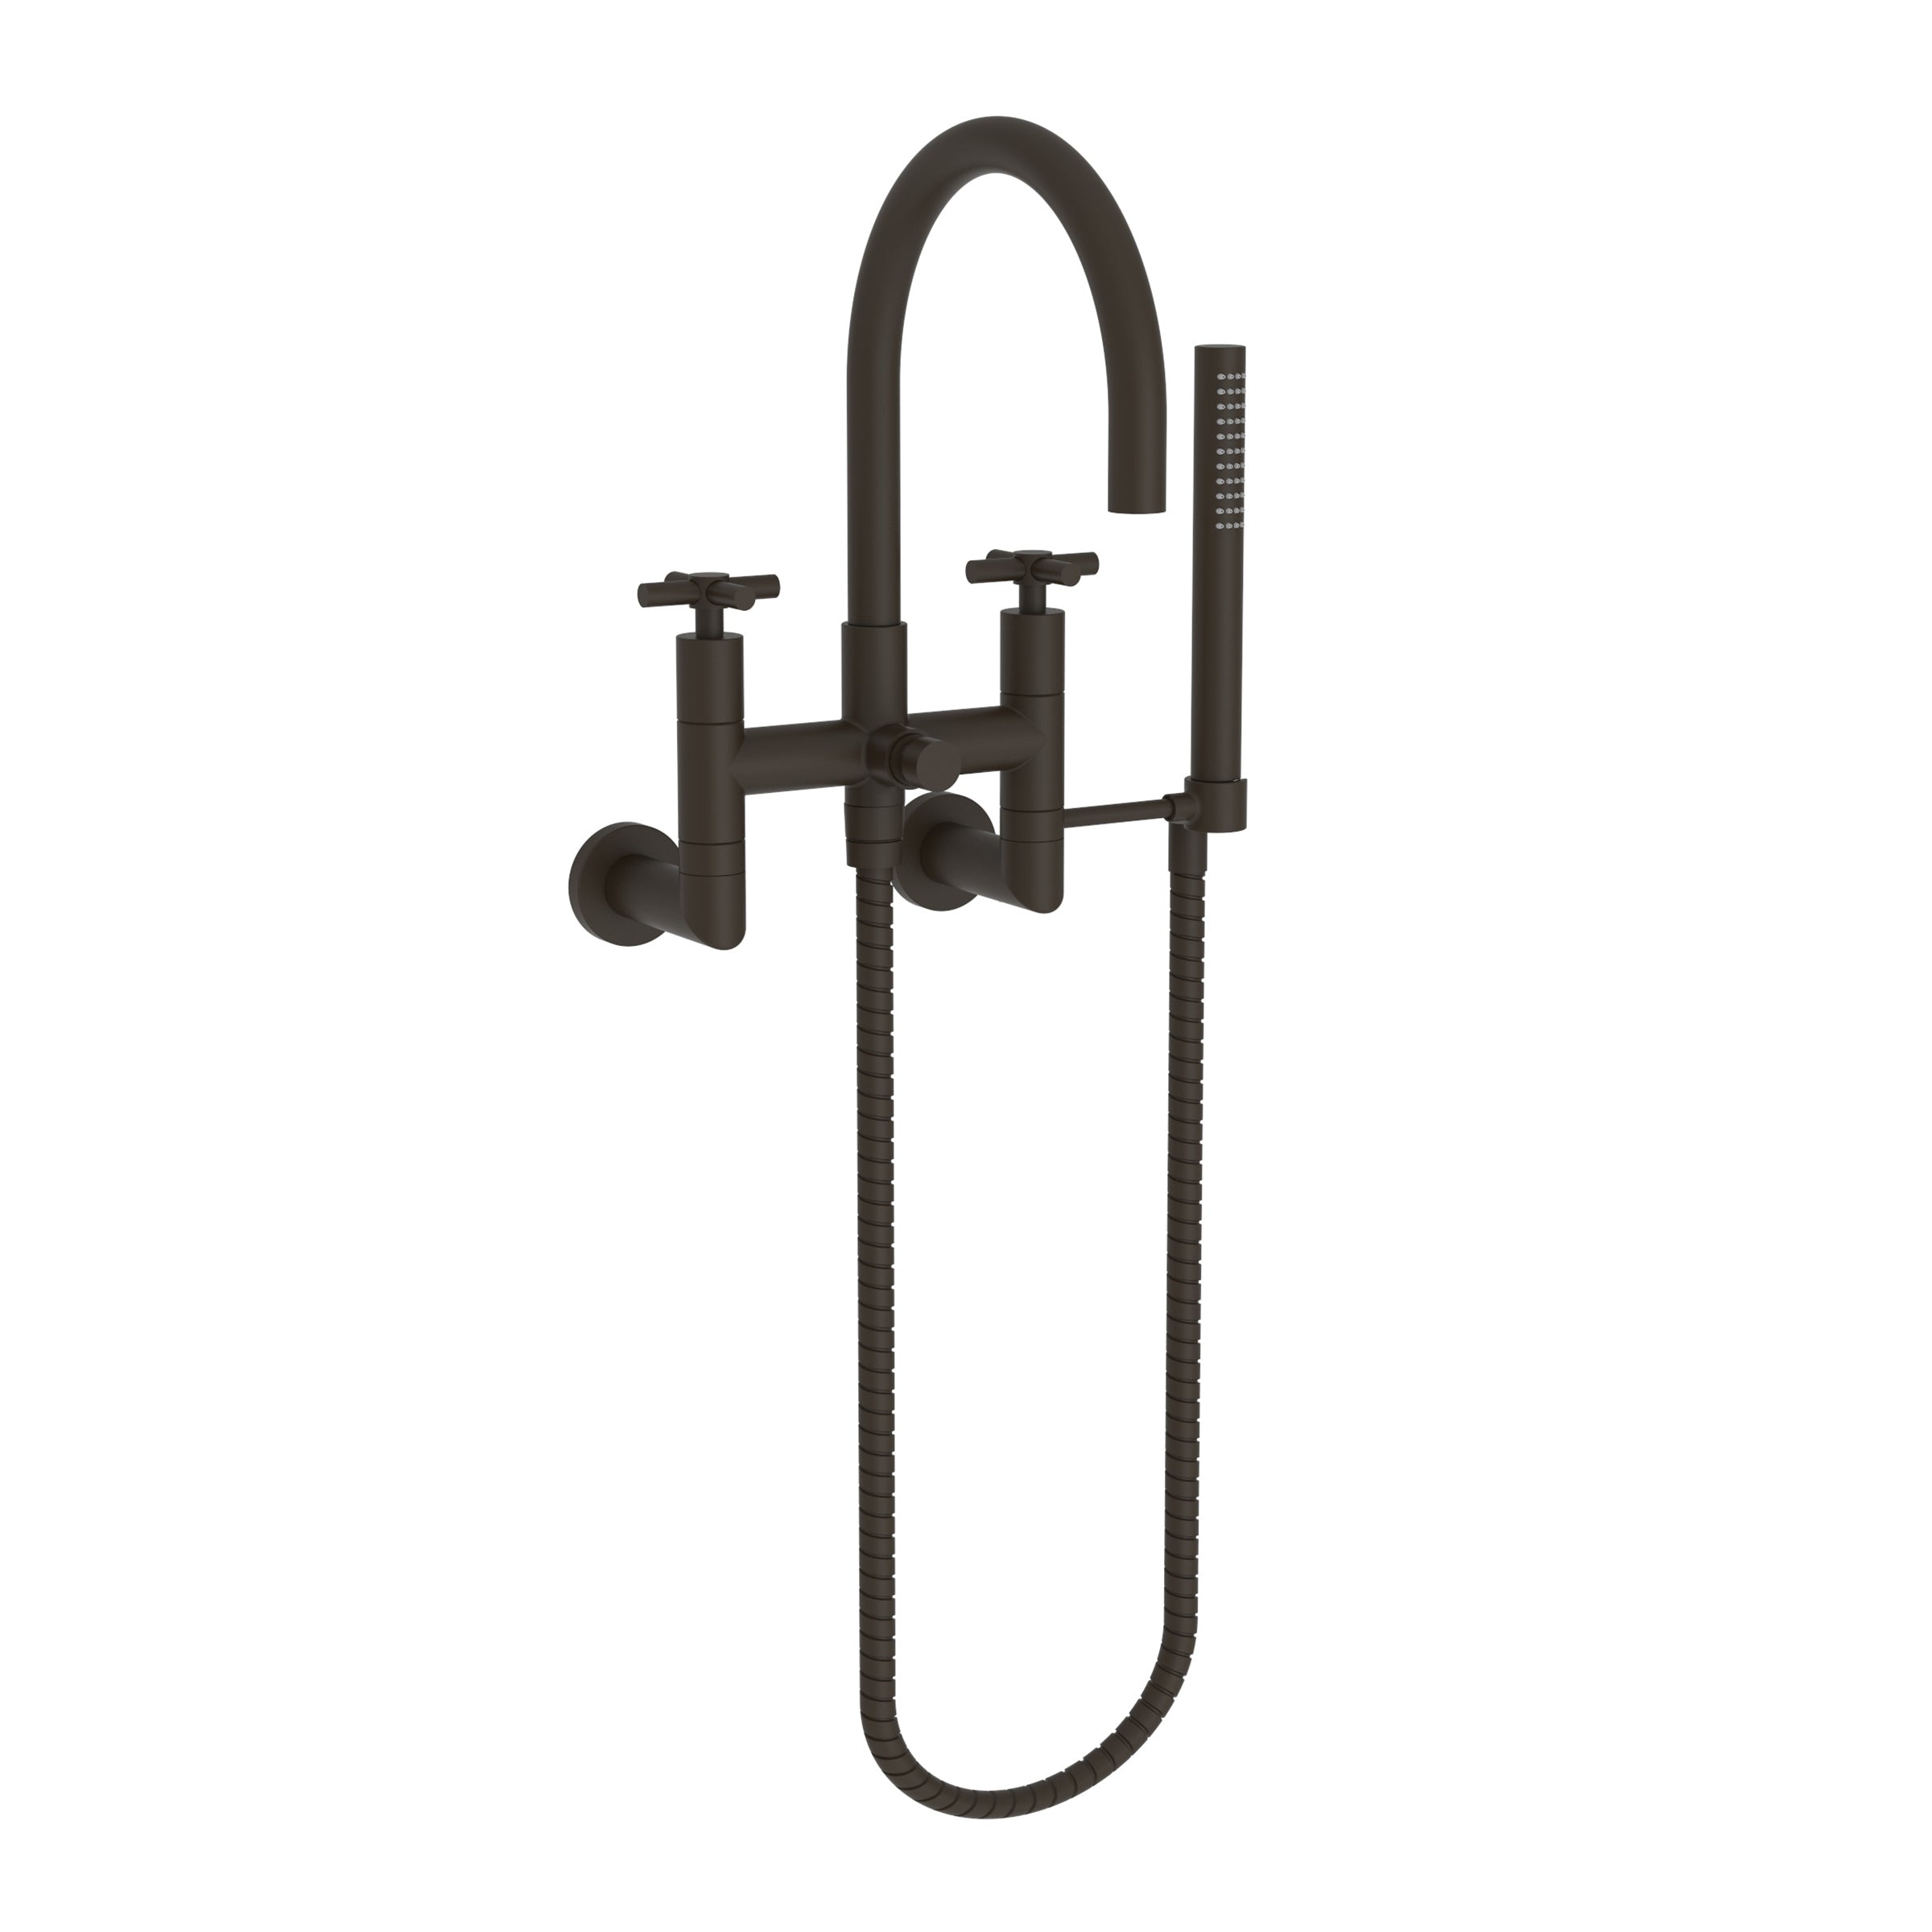 Newport Brass East Linear Exposed Tub & Hand Shower Set - Wall Mount